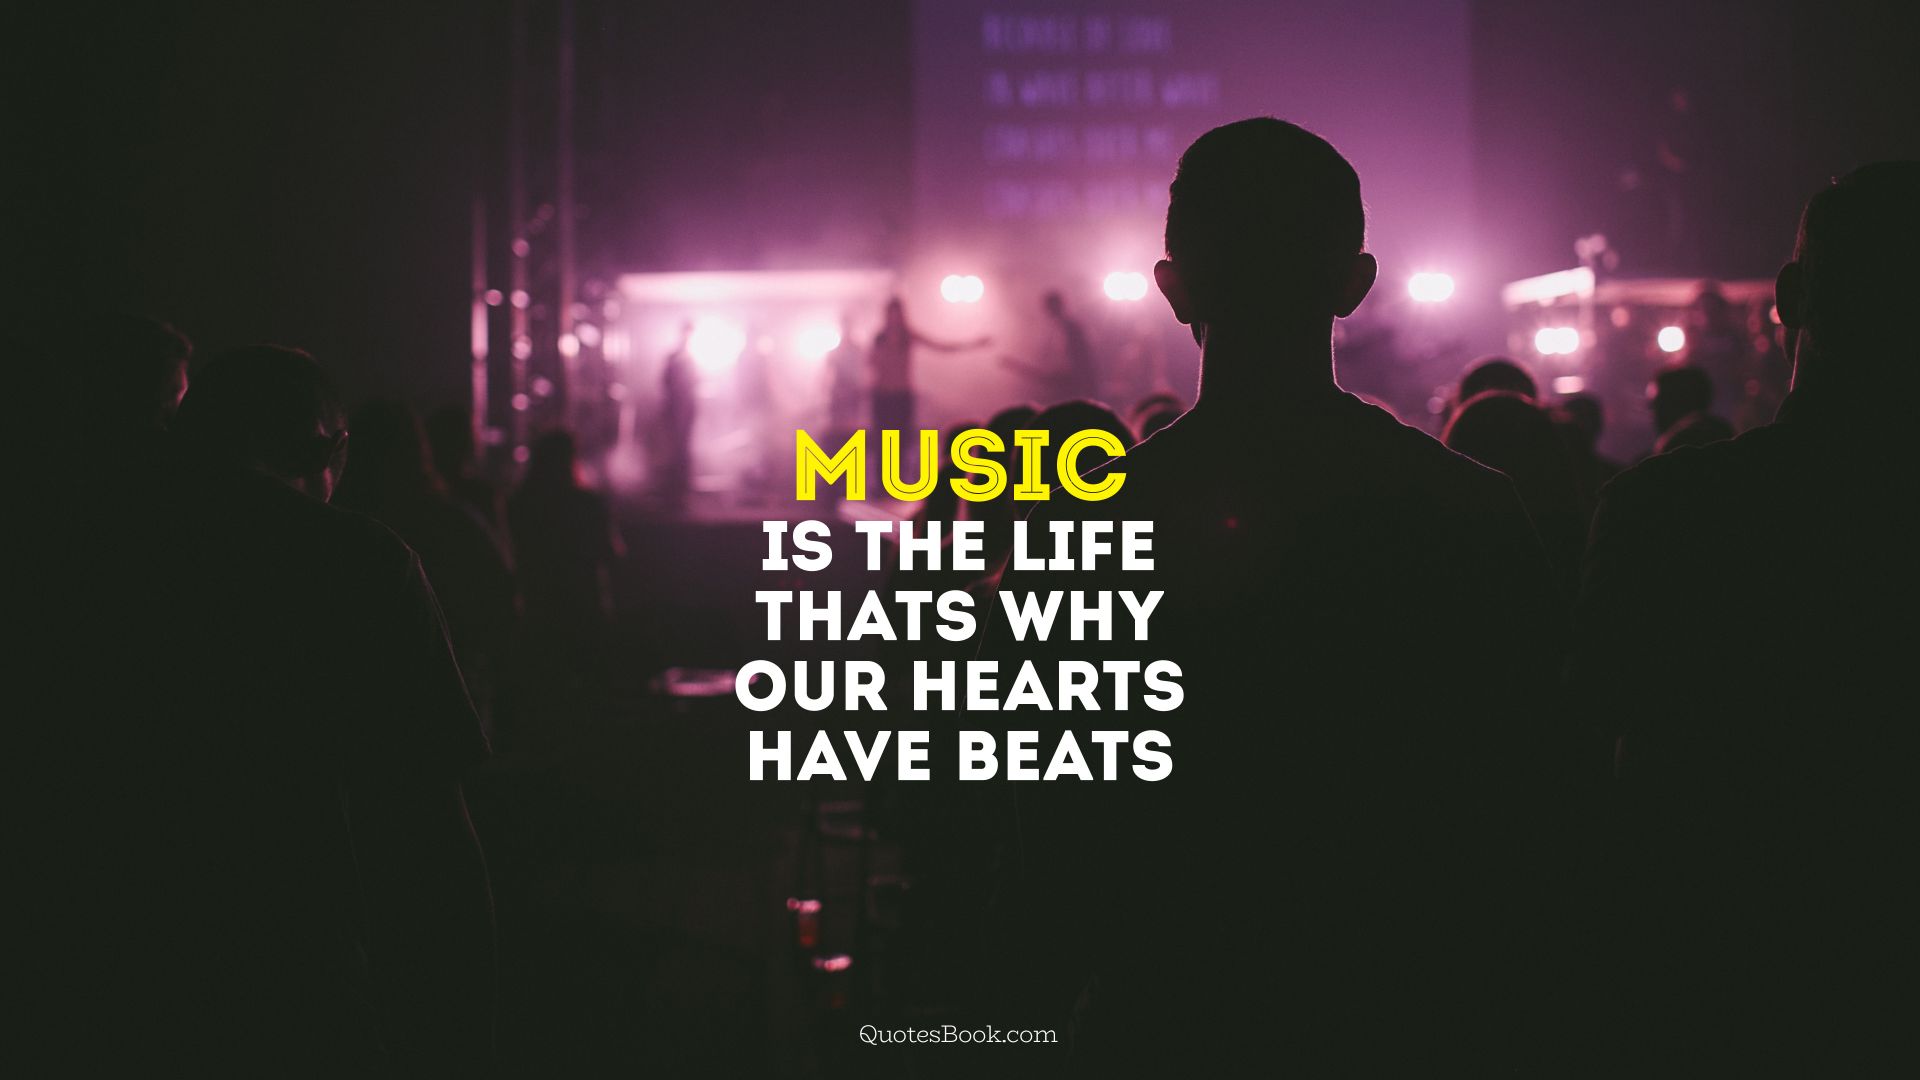 music is the life thats why our hearts have beats